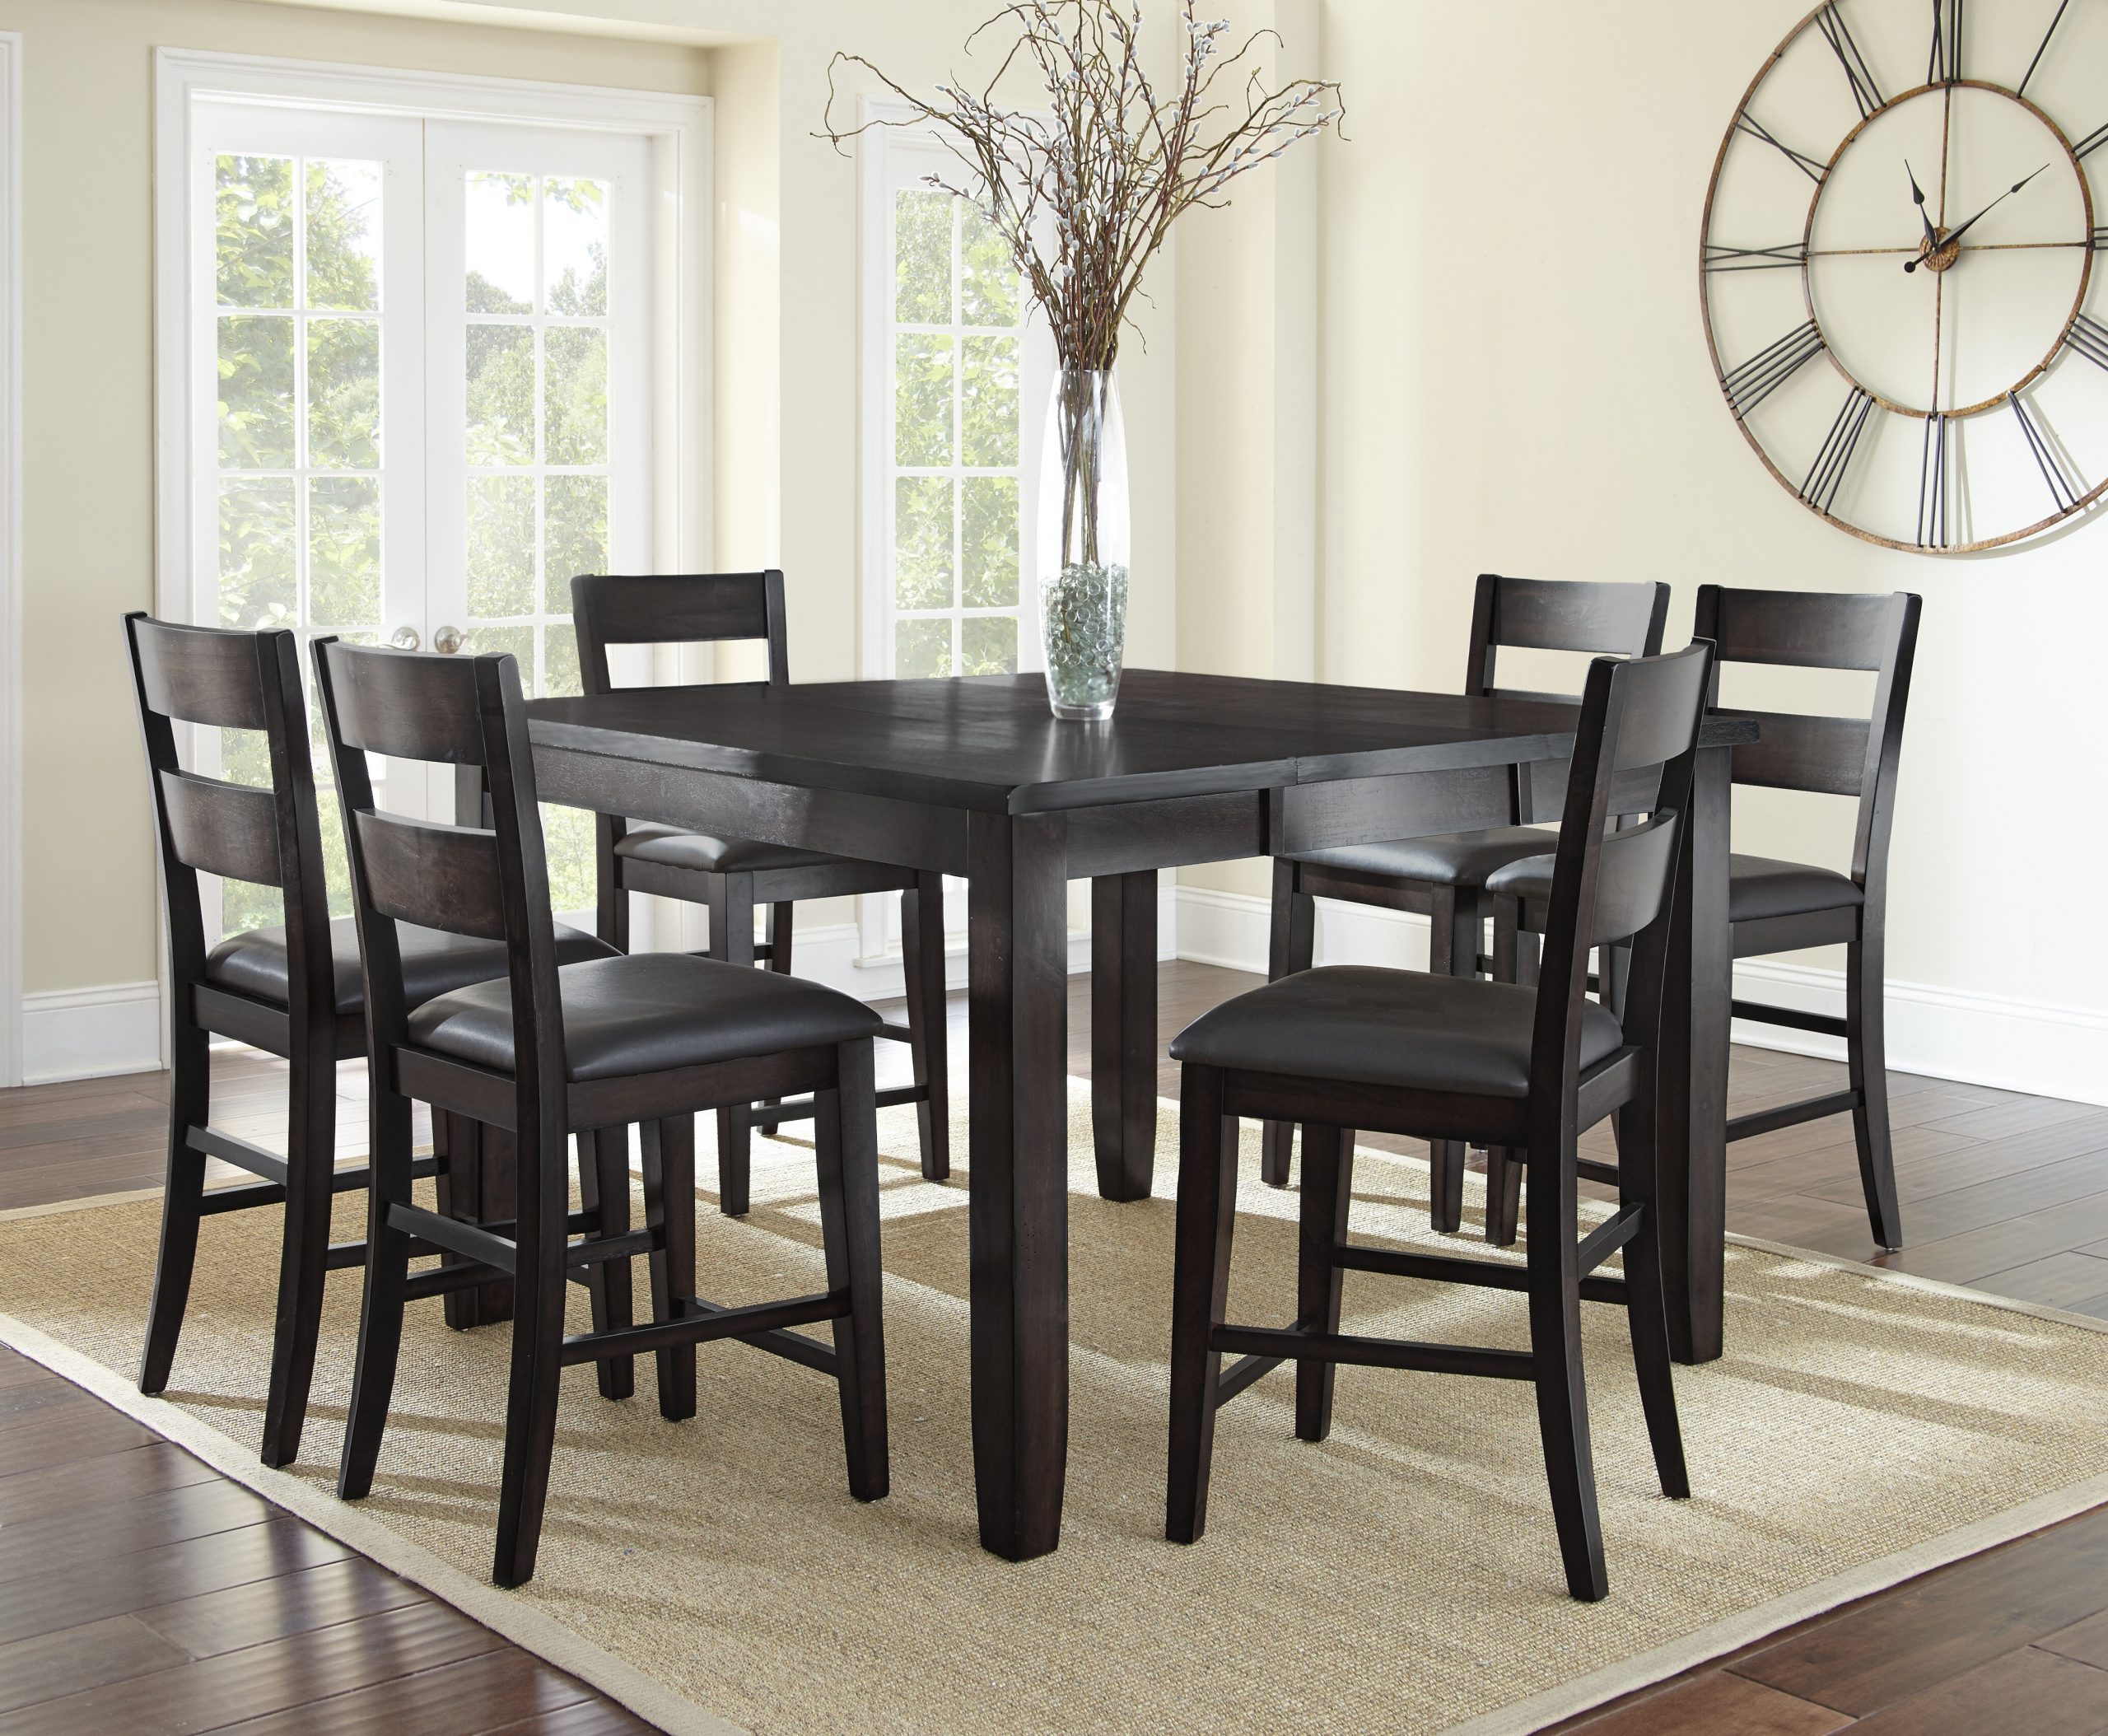 Wynwood 7 Piece Counter Height Solid Wood Dining Set inside sizing 4137 X 3407